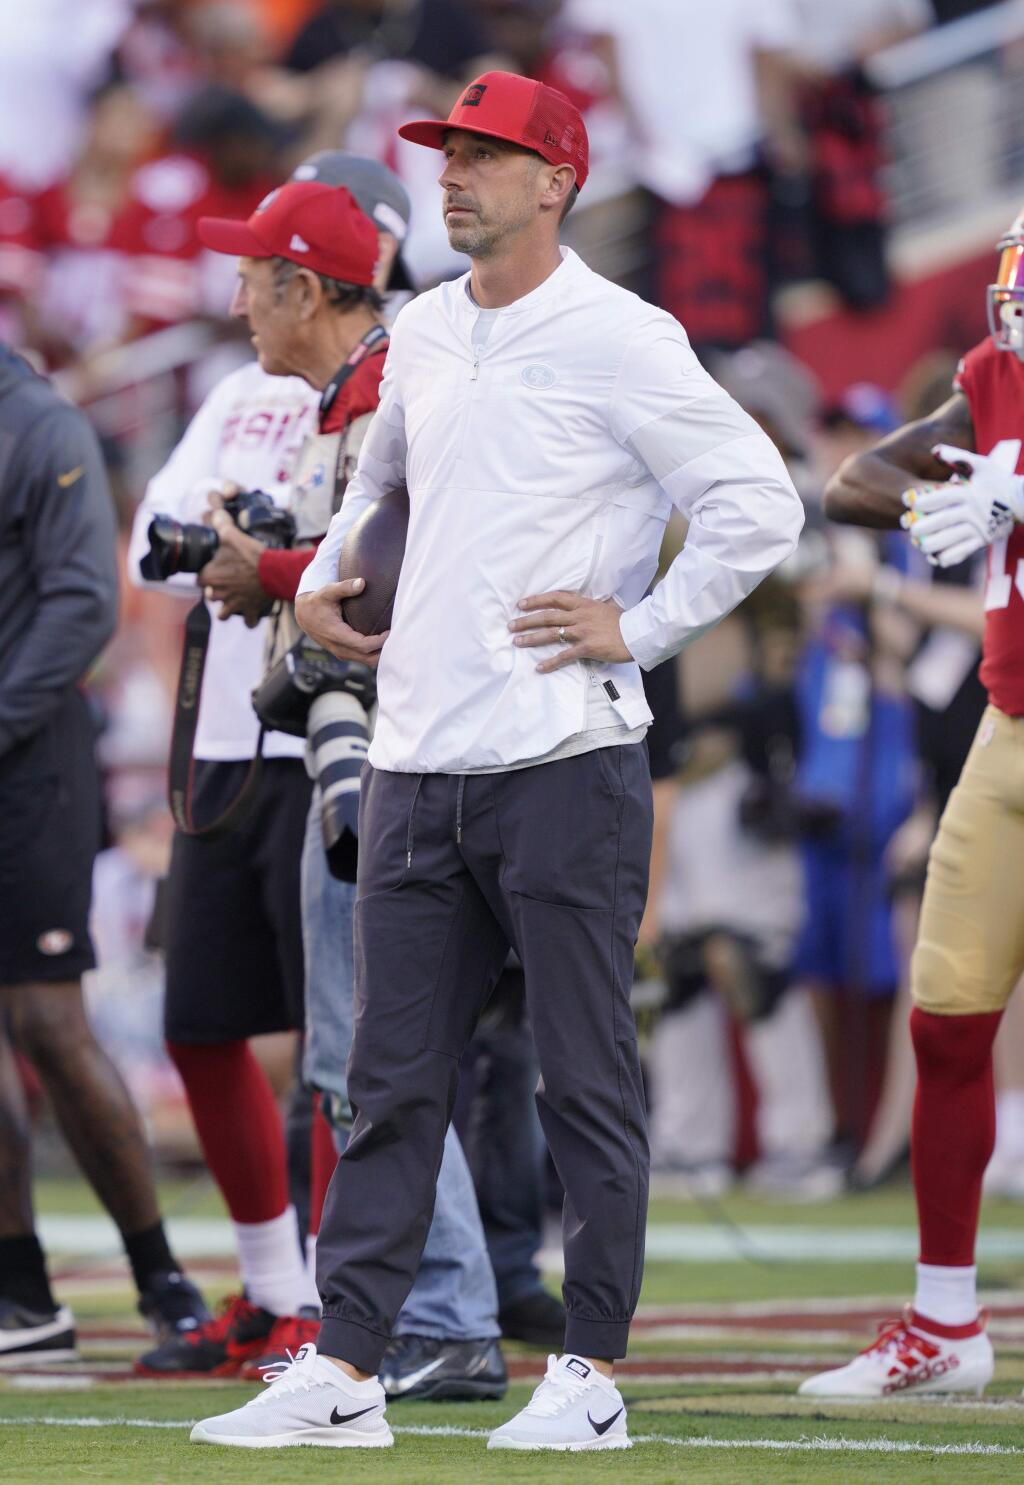 San Francisco 49ers head coach Kyle Shanahan watches before a game against the Cleveland Browns in Santa Clara, Monday, Oct. 7, 2019. (AP Photo/Tony Avelar)